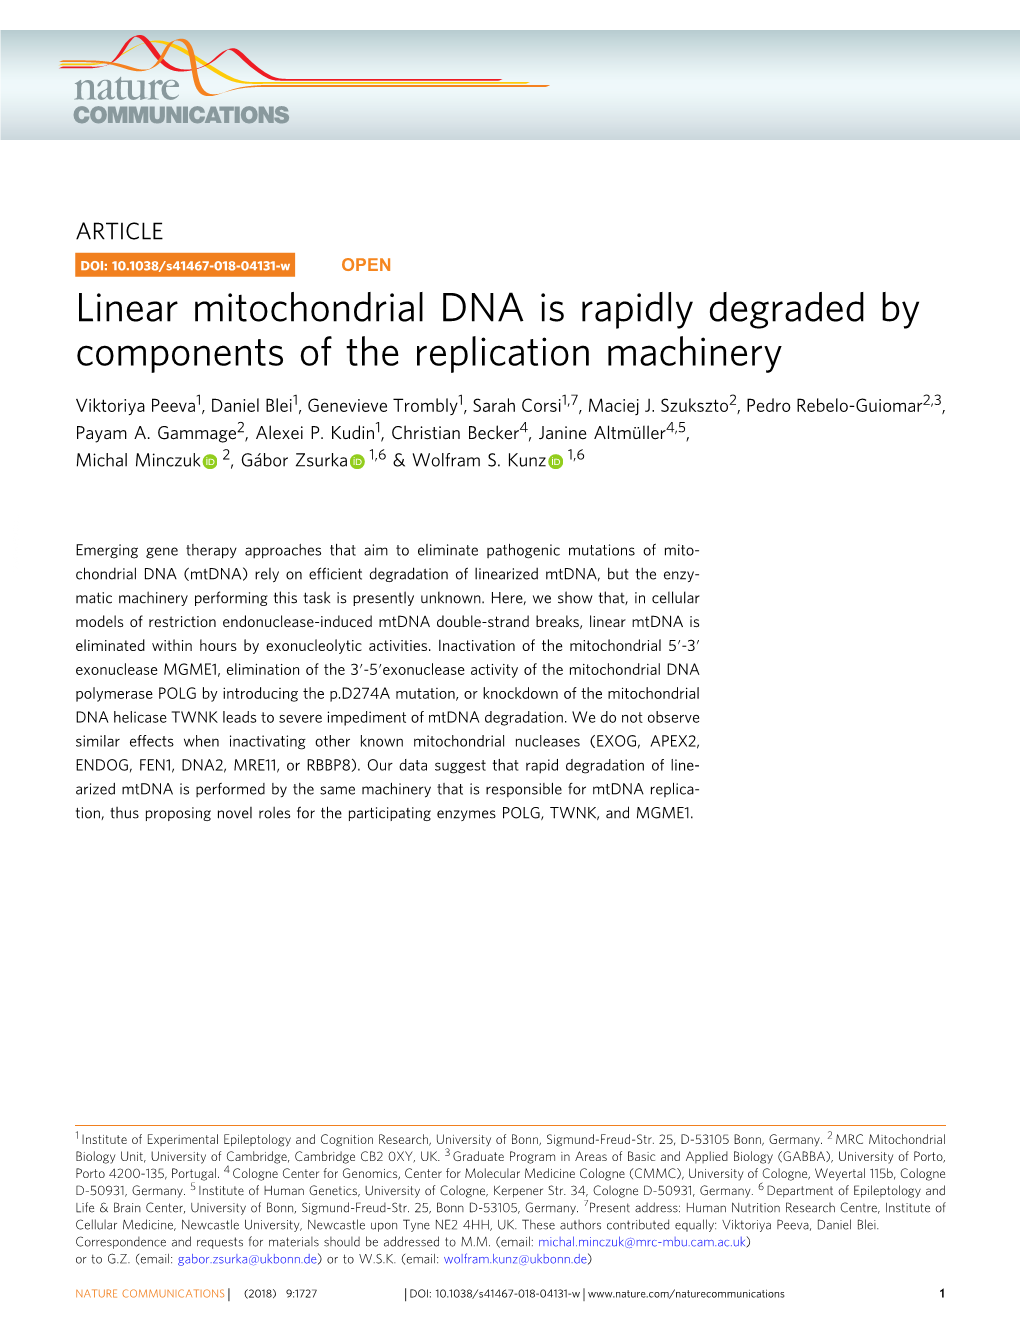 Linear Mitochondrial DNA Is Rapidly Degraded by Components of the Replication Machinery